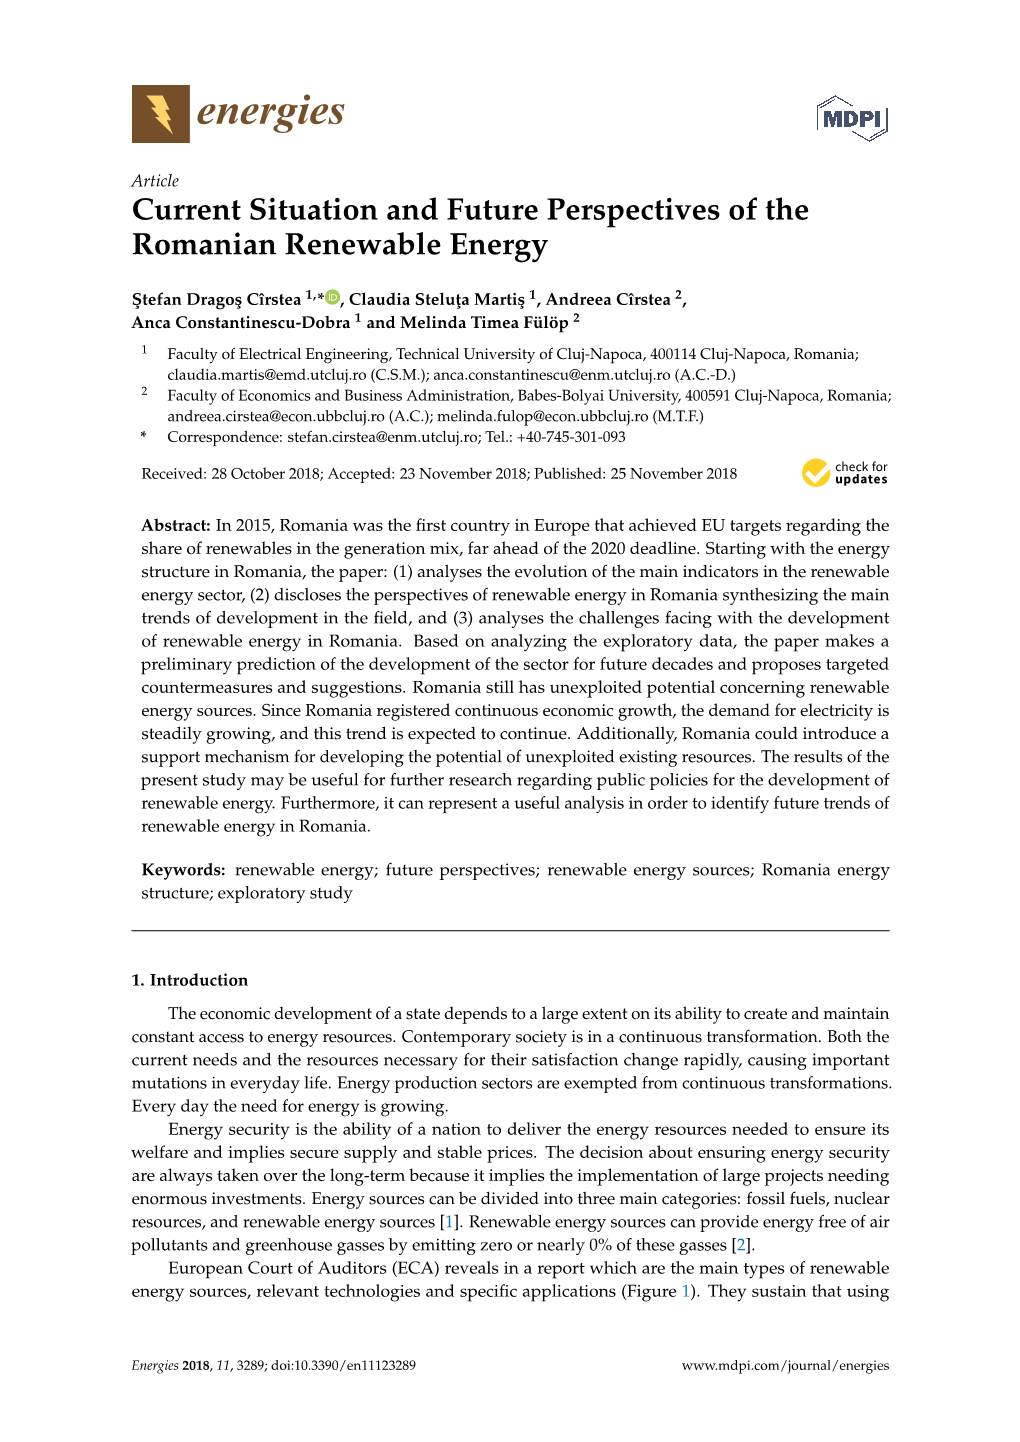 Current Situation and Future Perspectives of the Romanian Renewable Energy